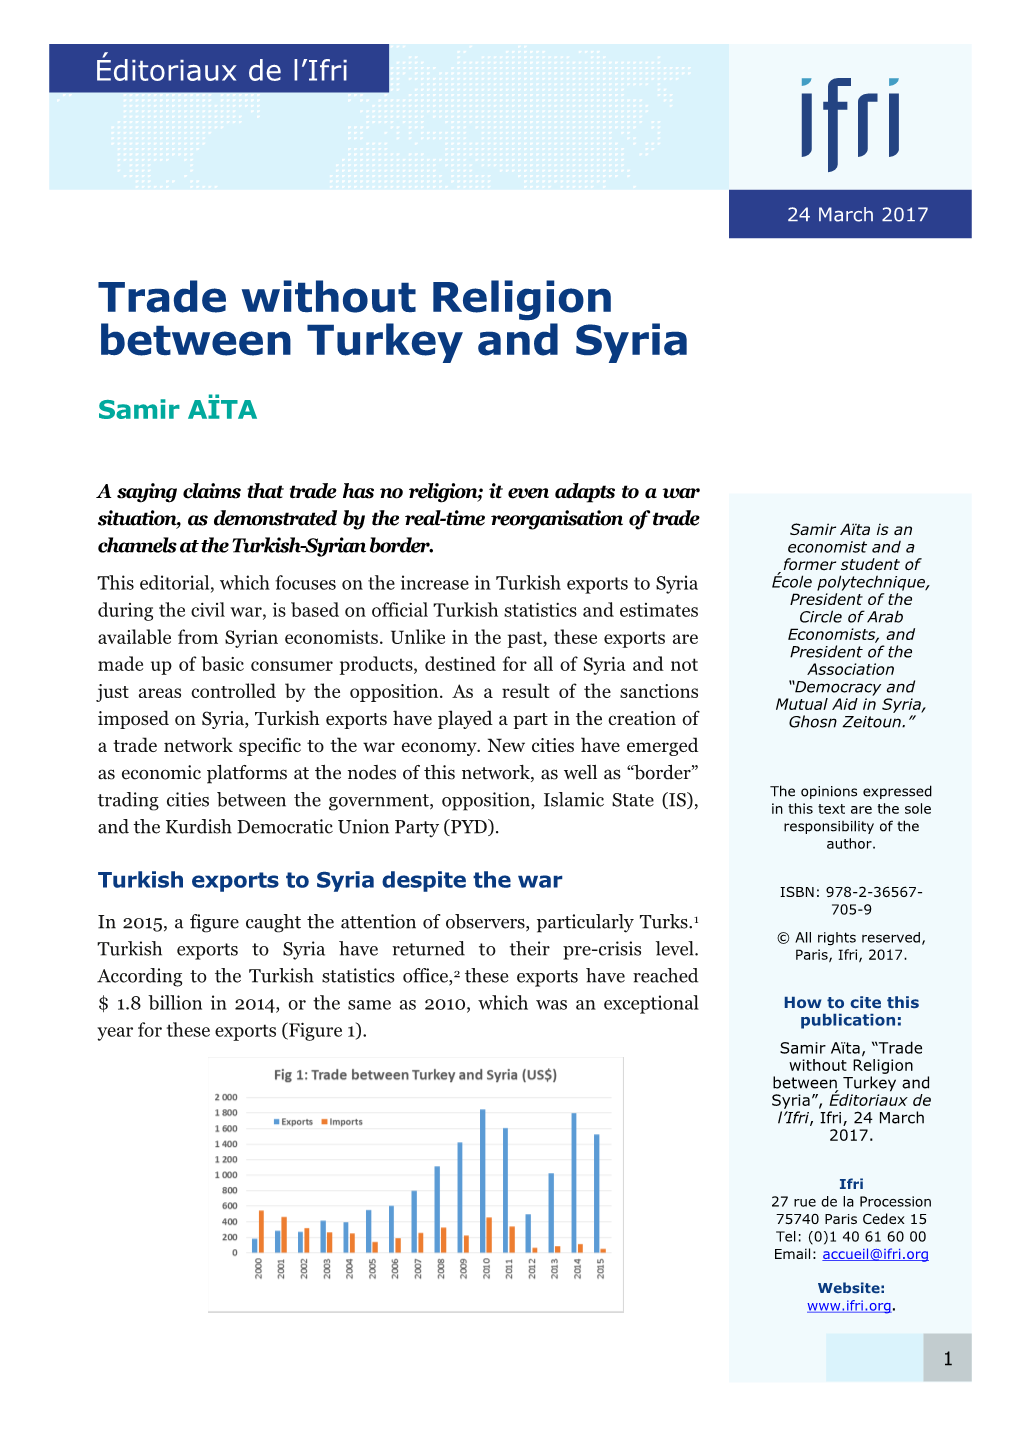 Trade Without Religion Between Turkey and Syria